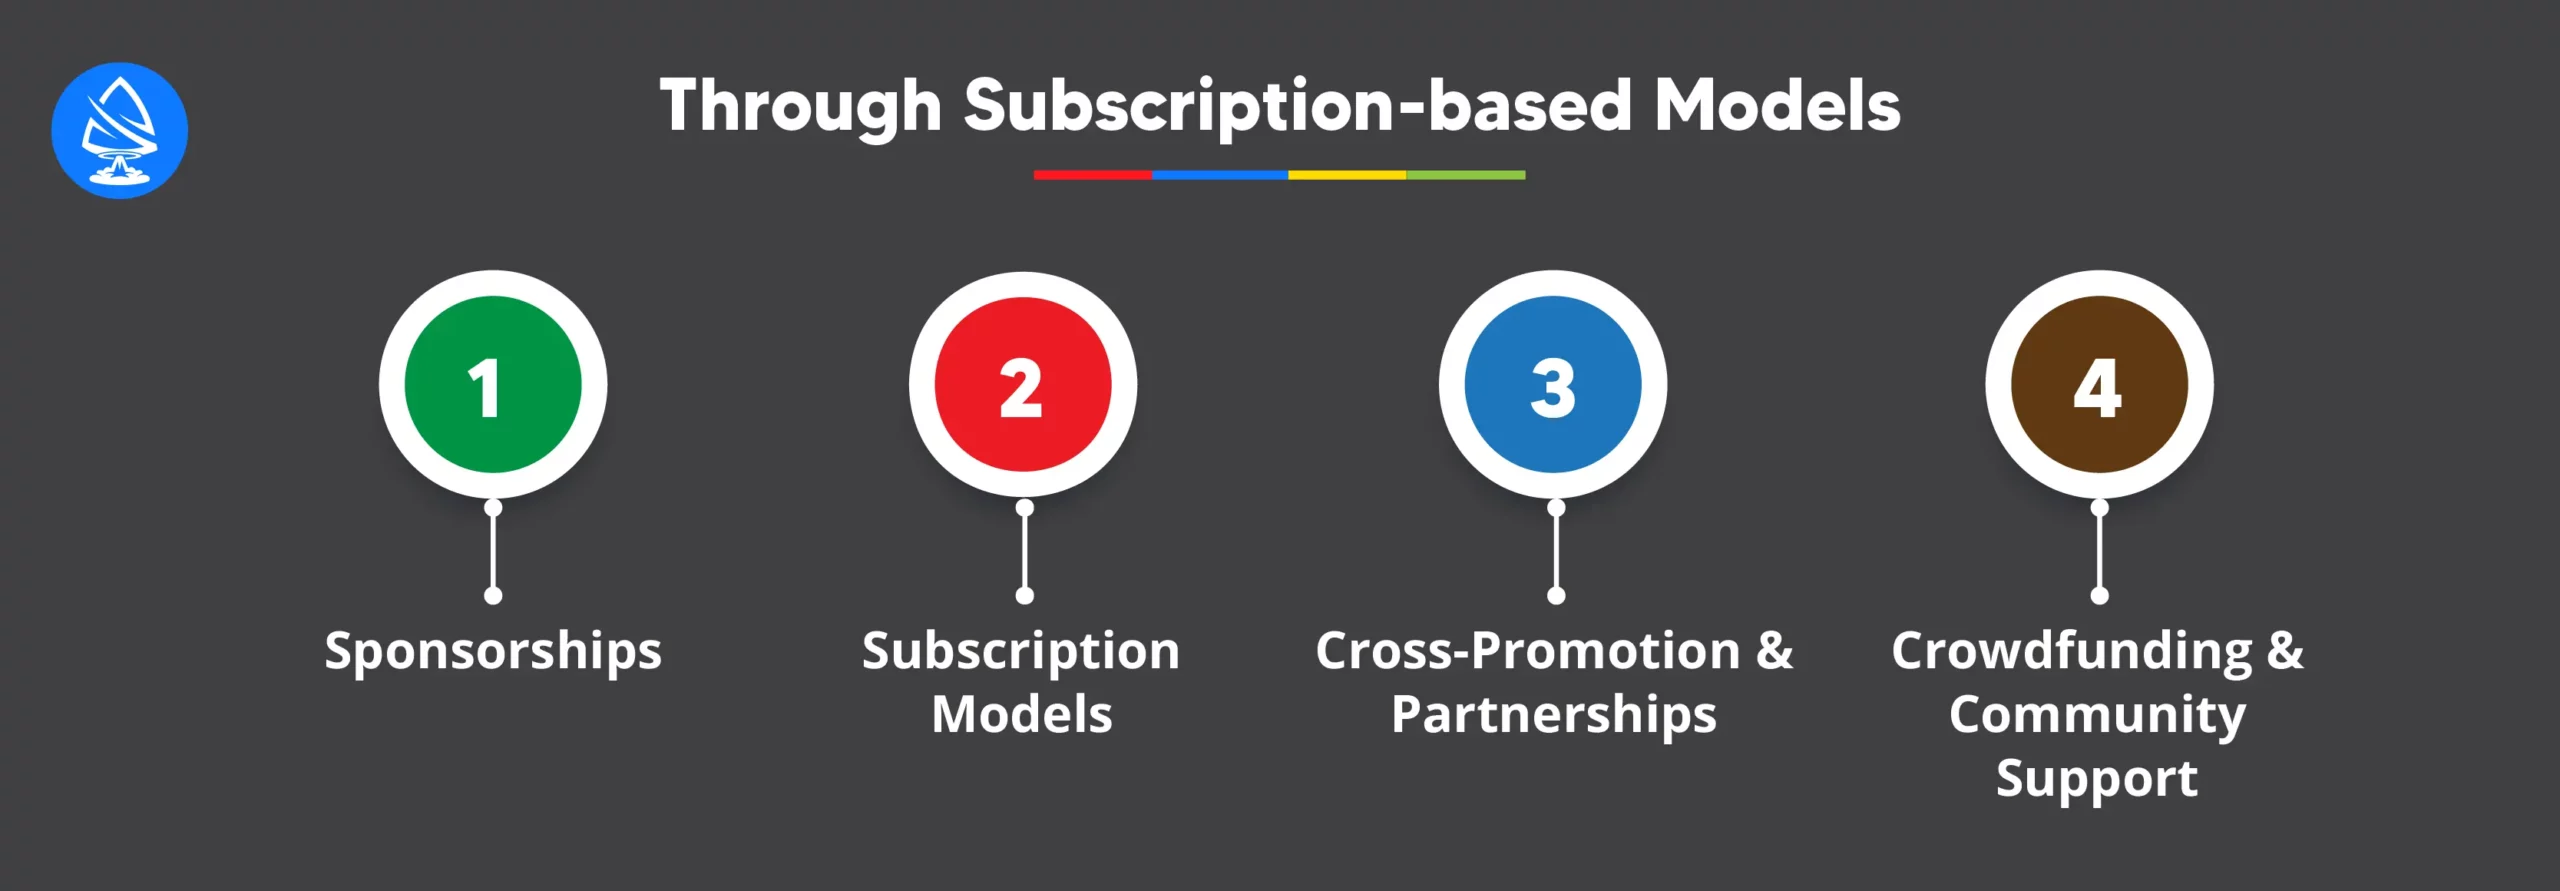 THROUGH SUBSCRIPTION-BASED MODELS